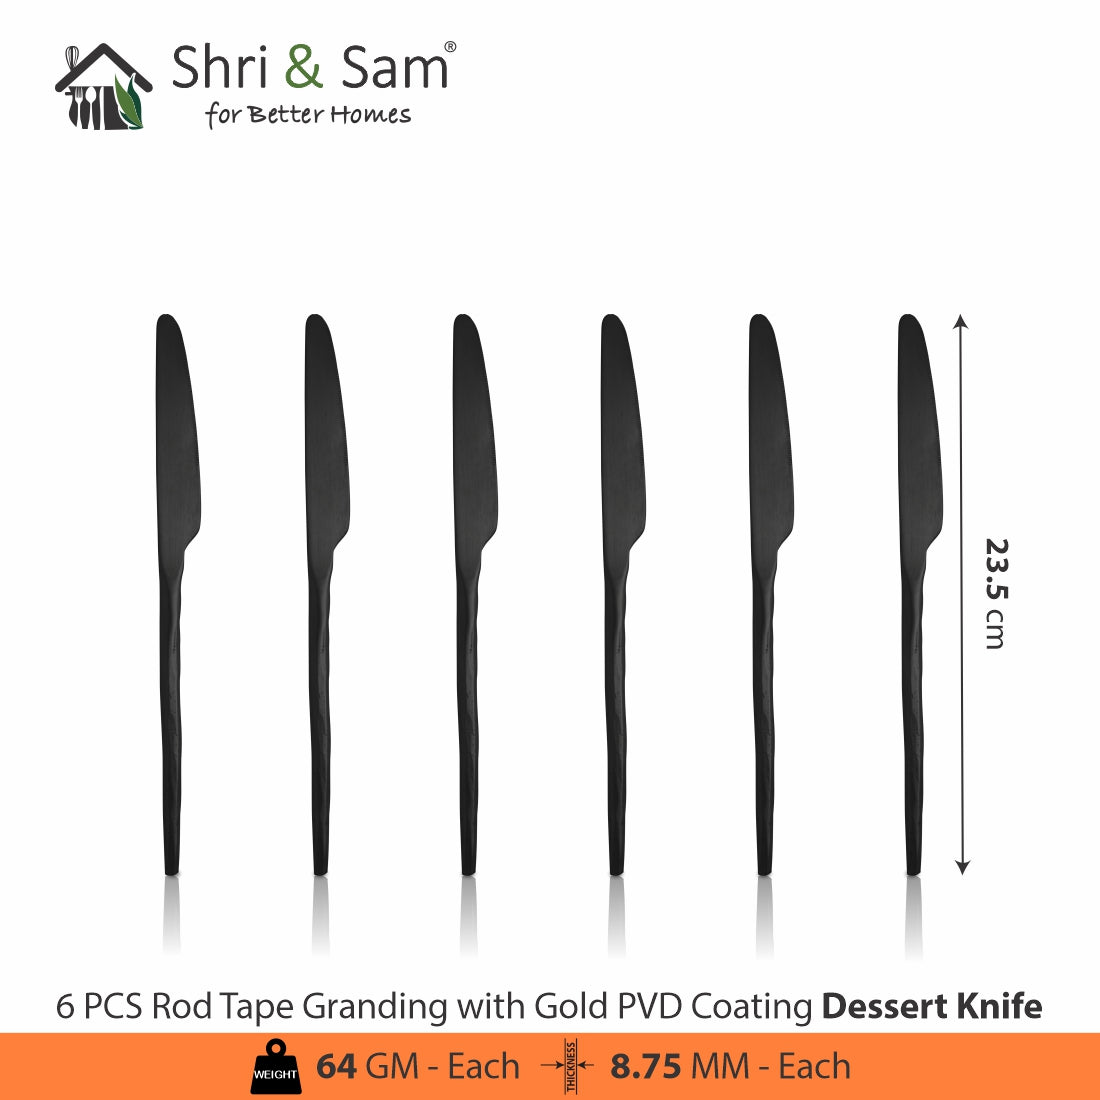 Stainless Steel 24 PCS Cutlery Set with PVD Coating Rod Tape Granding